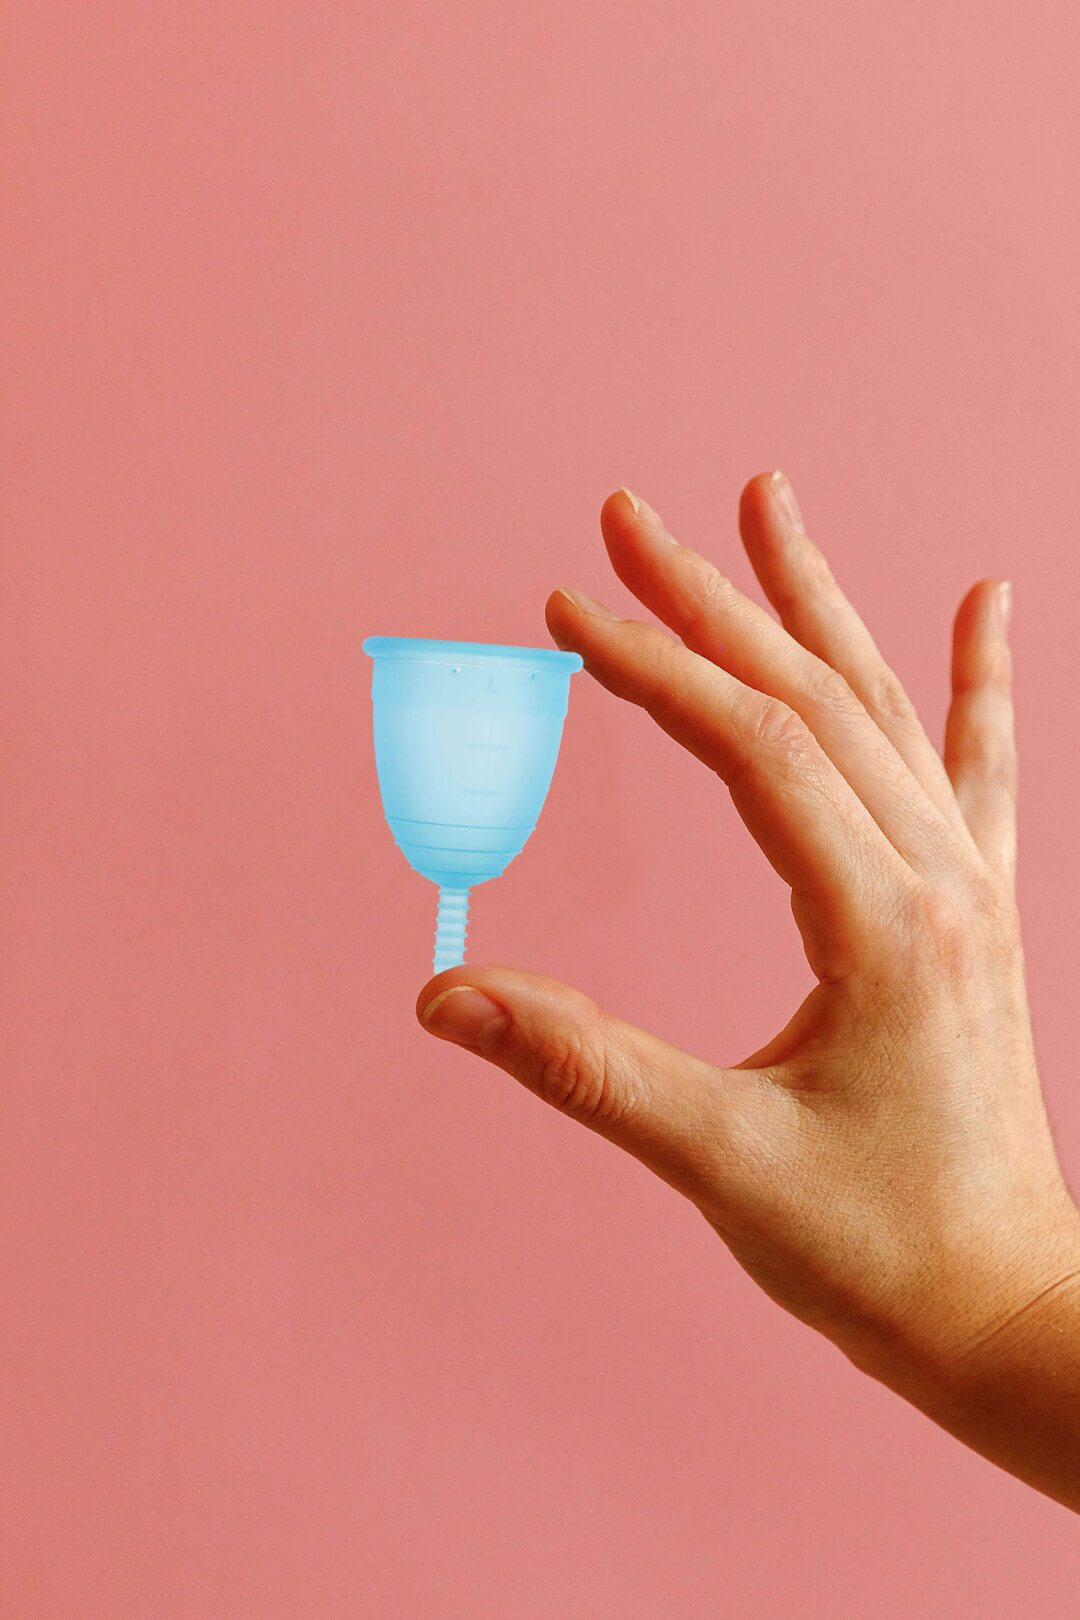 Woman holding a menstrual cup: discover how MamiCup® period cup works